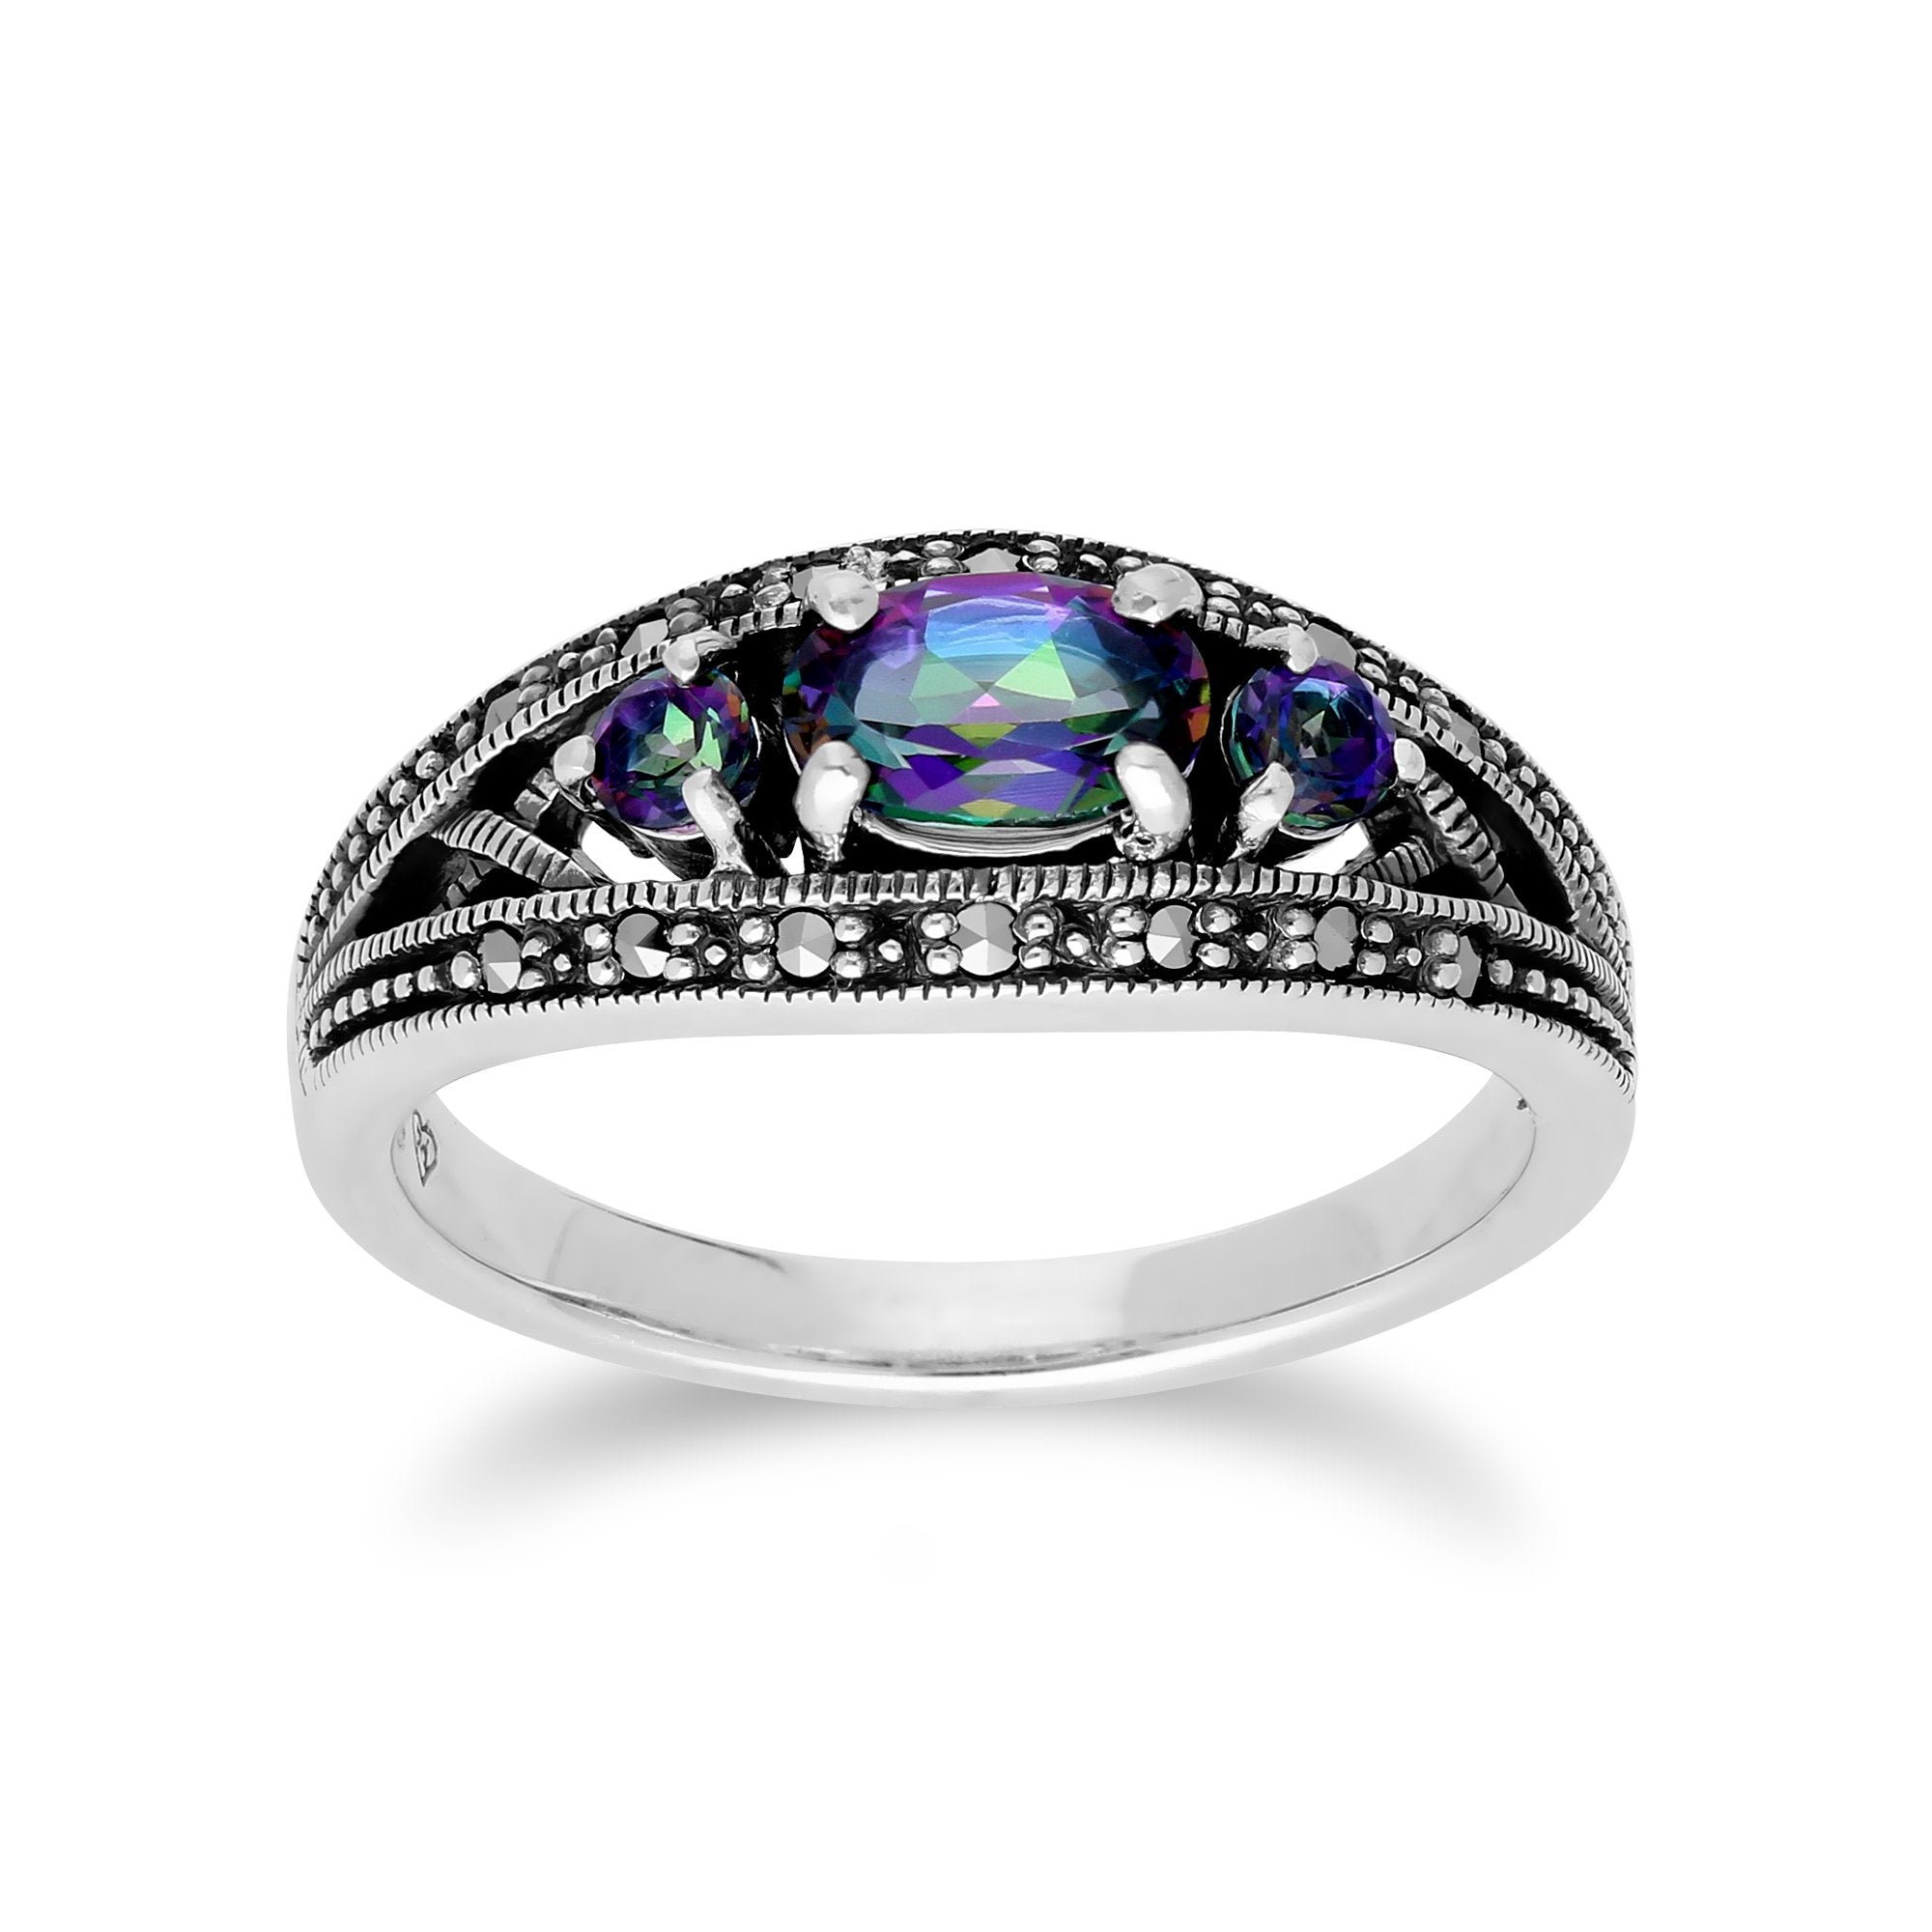 Art Deco Style Oval Mystic Topaz & Marcasite Three Stone Ring in 925 Sterling Silver